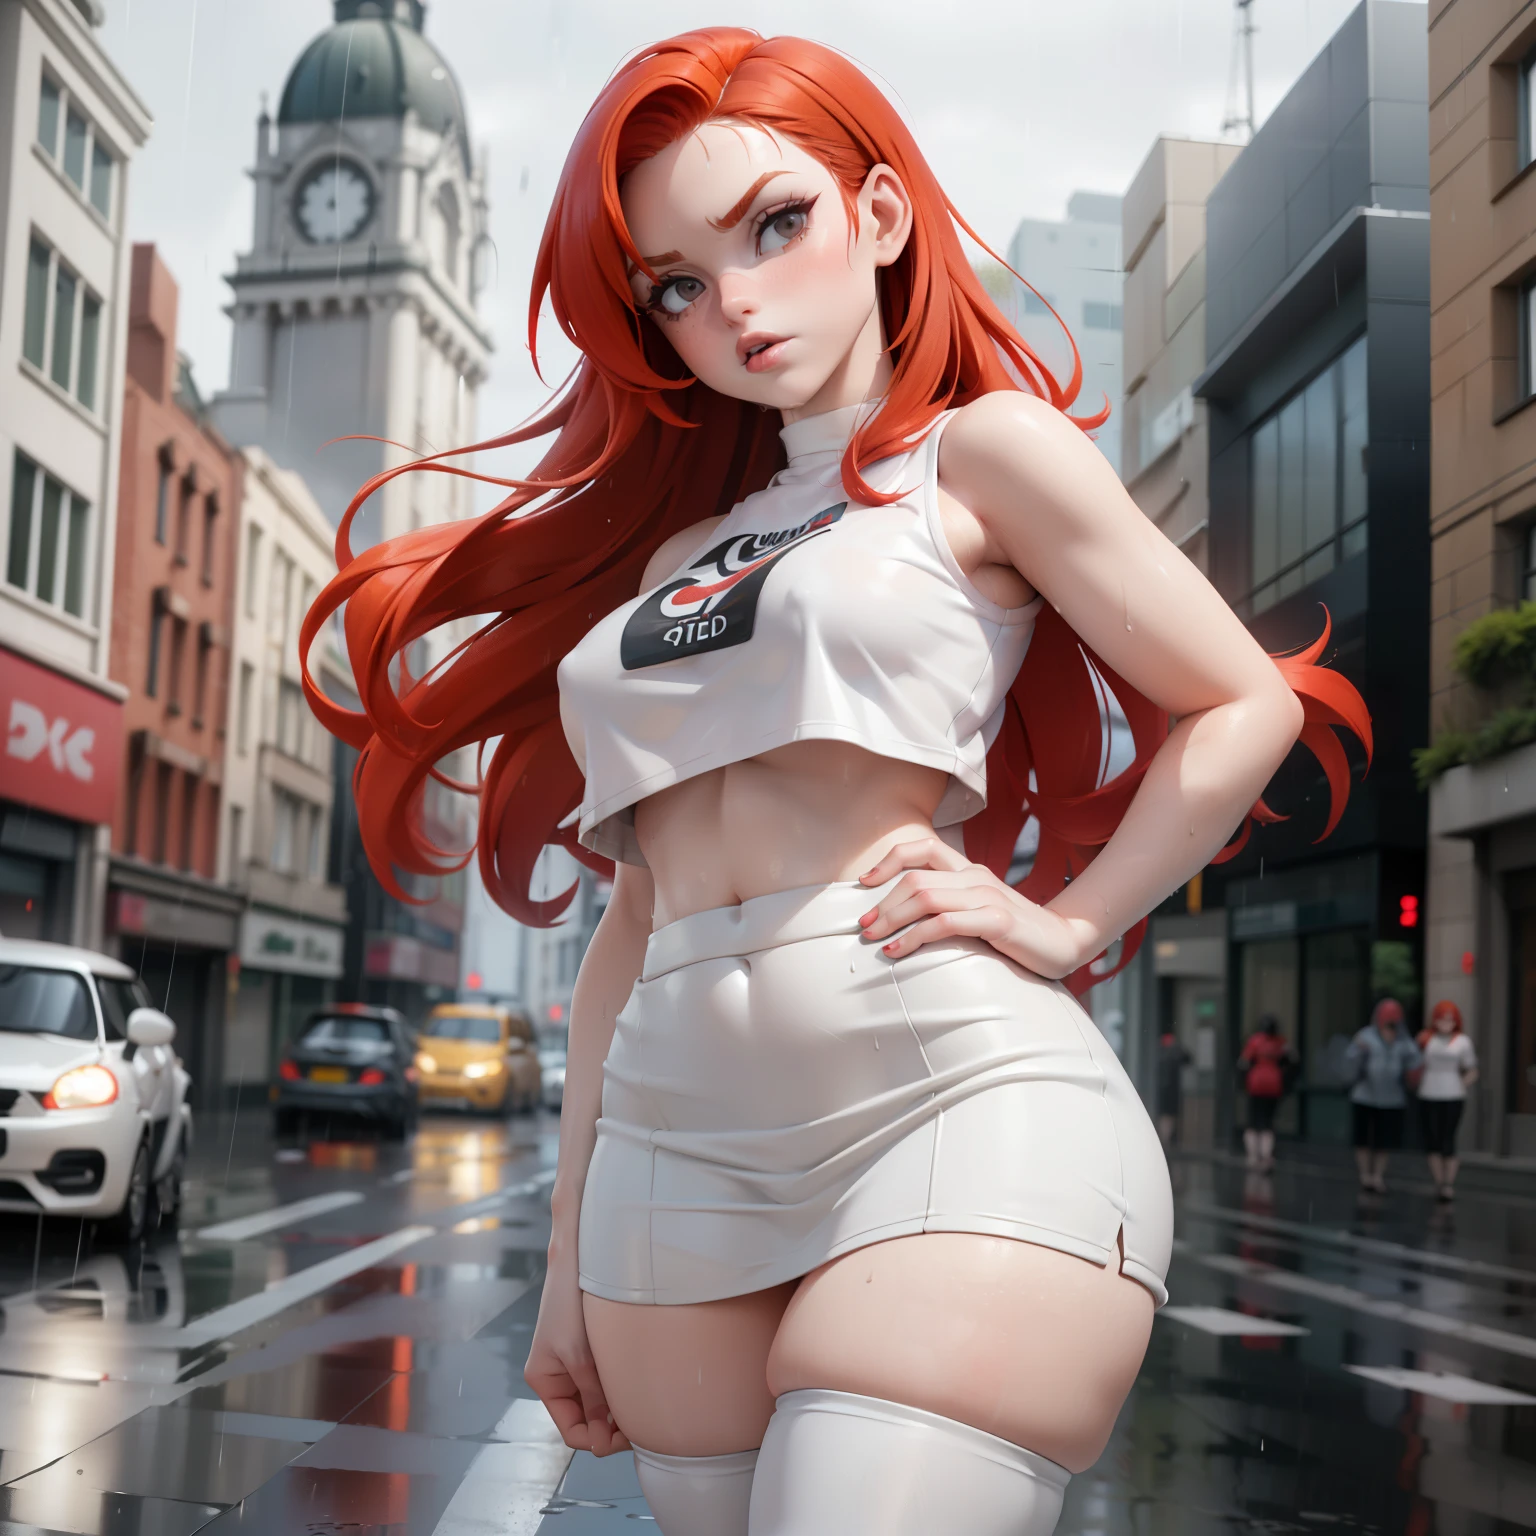 ((redhead teenager)), ((pale skin)), ((walking in Dublin)), ((tiny boobs:0.2)), ((straight, flat boobs)), ((extremely thick hips)), (( generous culottes)), ((thick legs)), ((fat thighs)), ((drenched white mini skirt)), ((white tank top with belly exposed)), ((red hair wet from the rain)), ((determined look)), ((rainy urban environment)), ((high definition)).